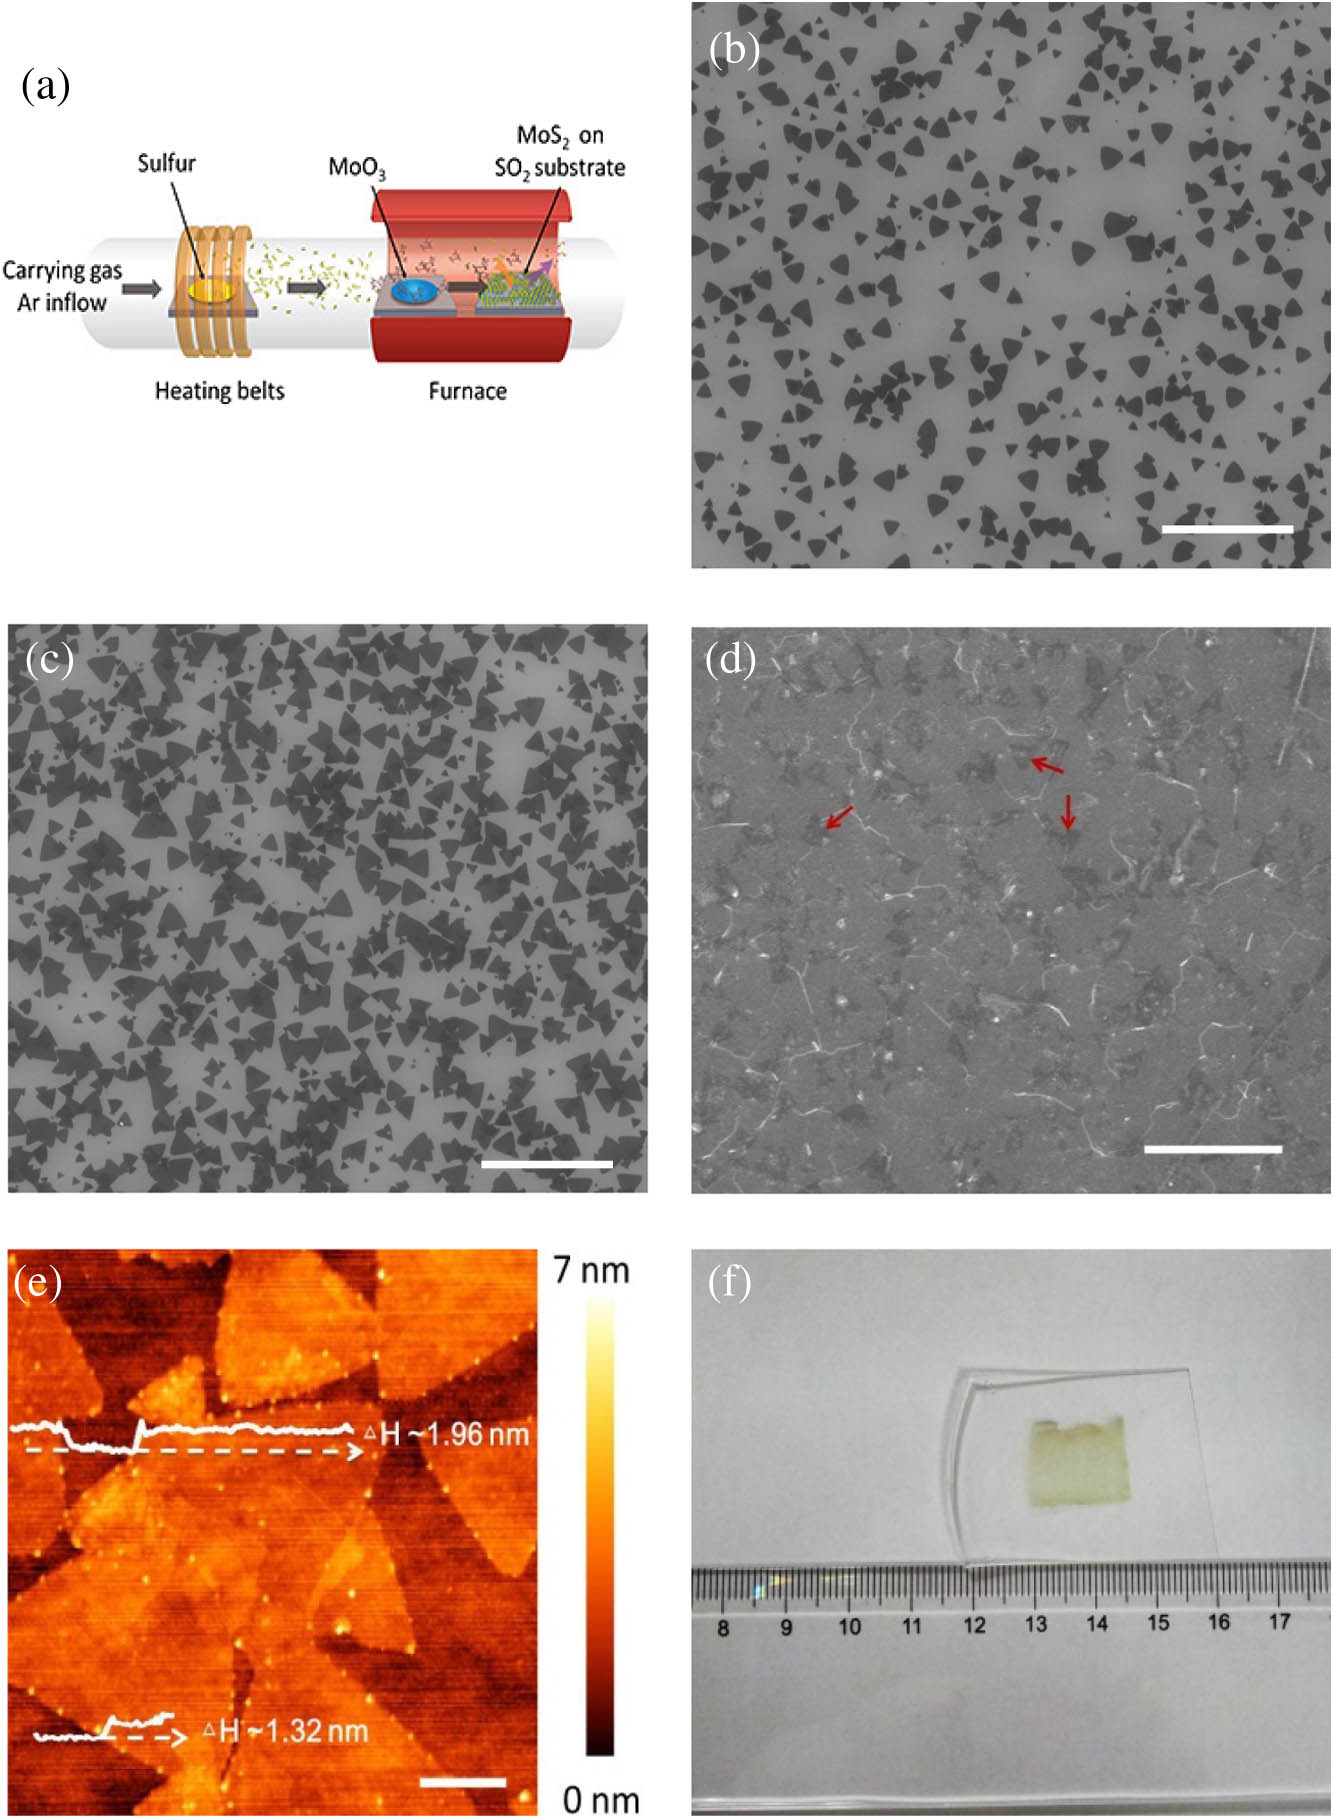 Material characterizations of MoS2; (a) schematic diagram showing the chemical synthesis of MoS2; (b–d) SEM images showing different growth stages of MoS2 with different reaction times of 5, 12, and 30 min, respectively. Scale bars, 10 μm; (e) AFM topography of MoS2 film on SiO2 substrate. Bottom and top white profiles indicate bilayer and trilayers, respectively. Scale bar, 1 μm; (f) optical image of large-area MoS2 film transferred onto PDMS substrate.